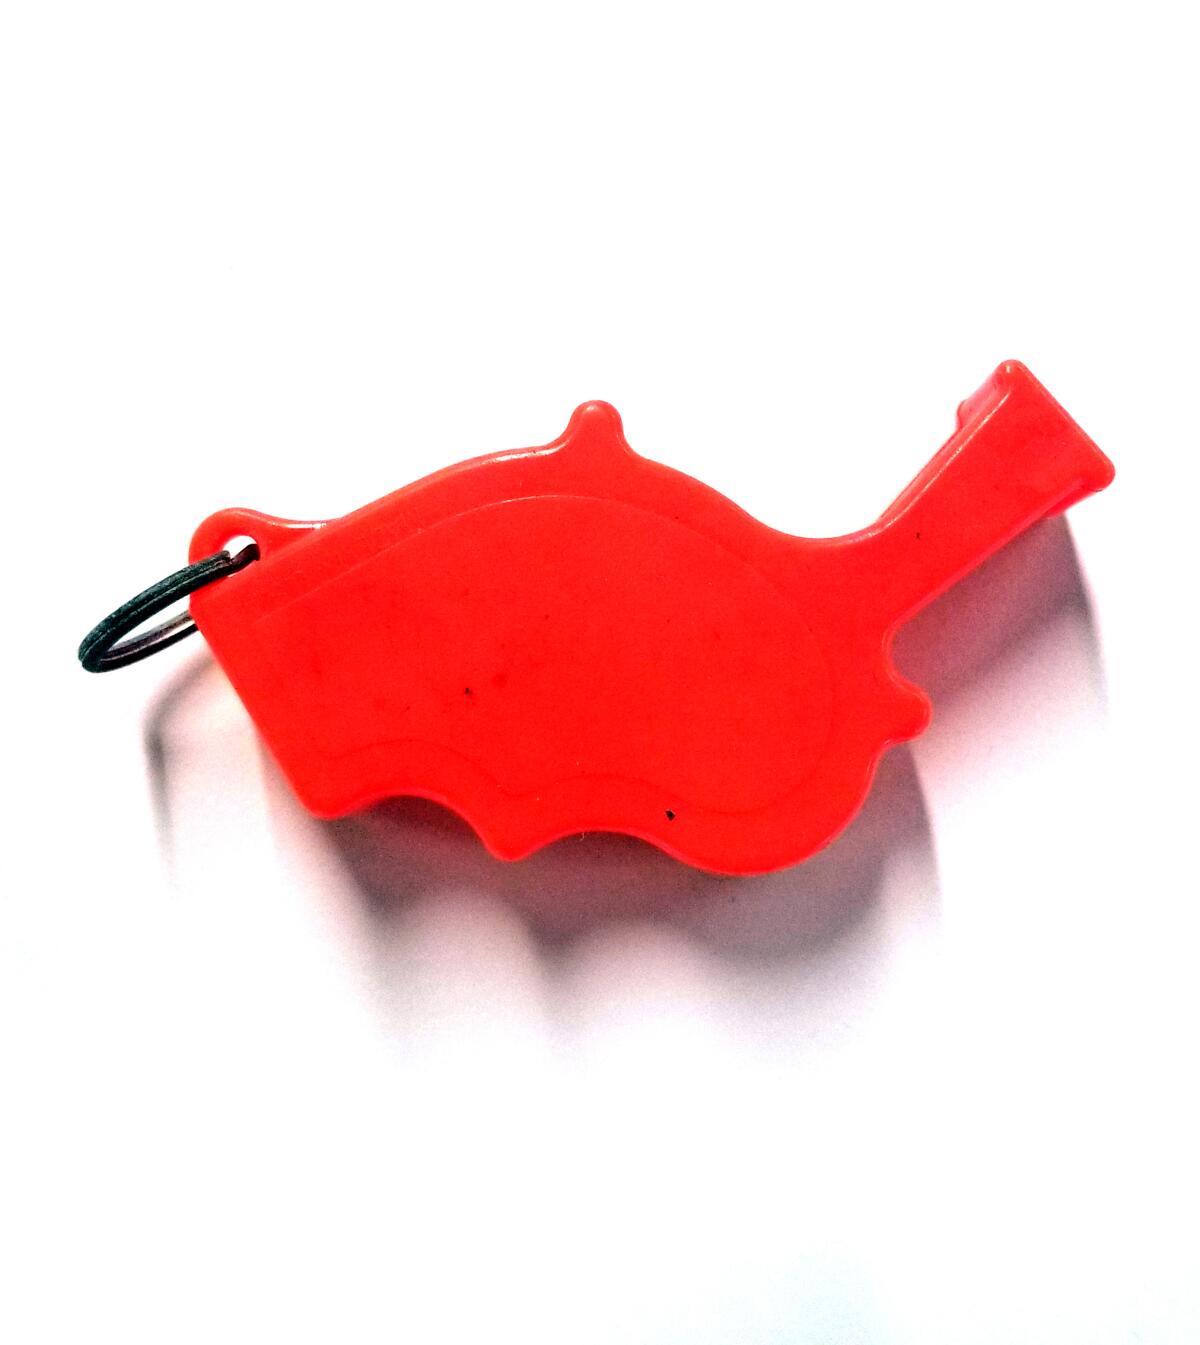 Safety whistle